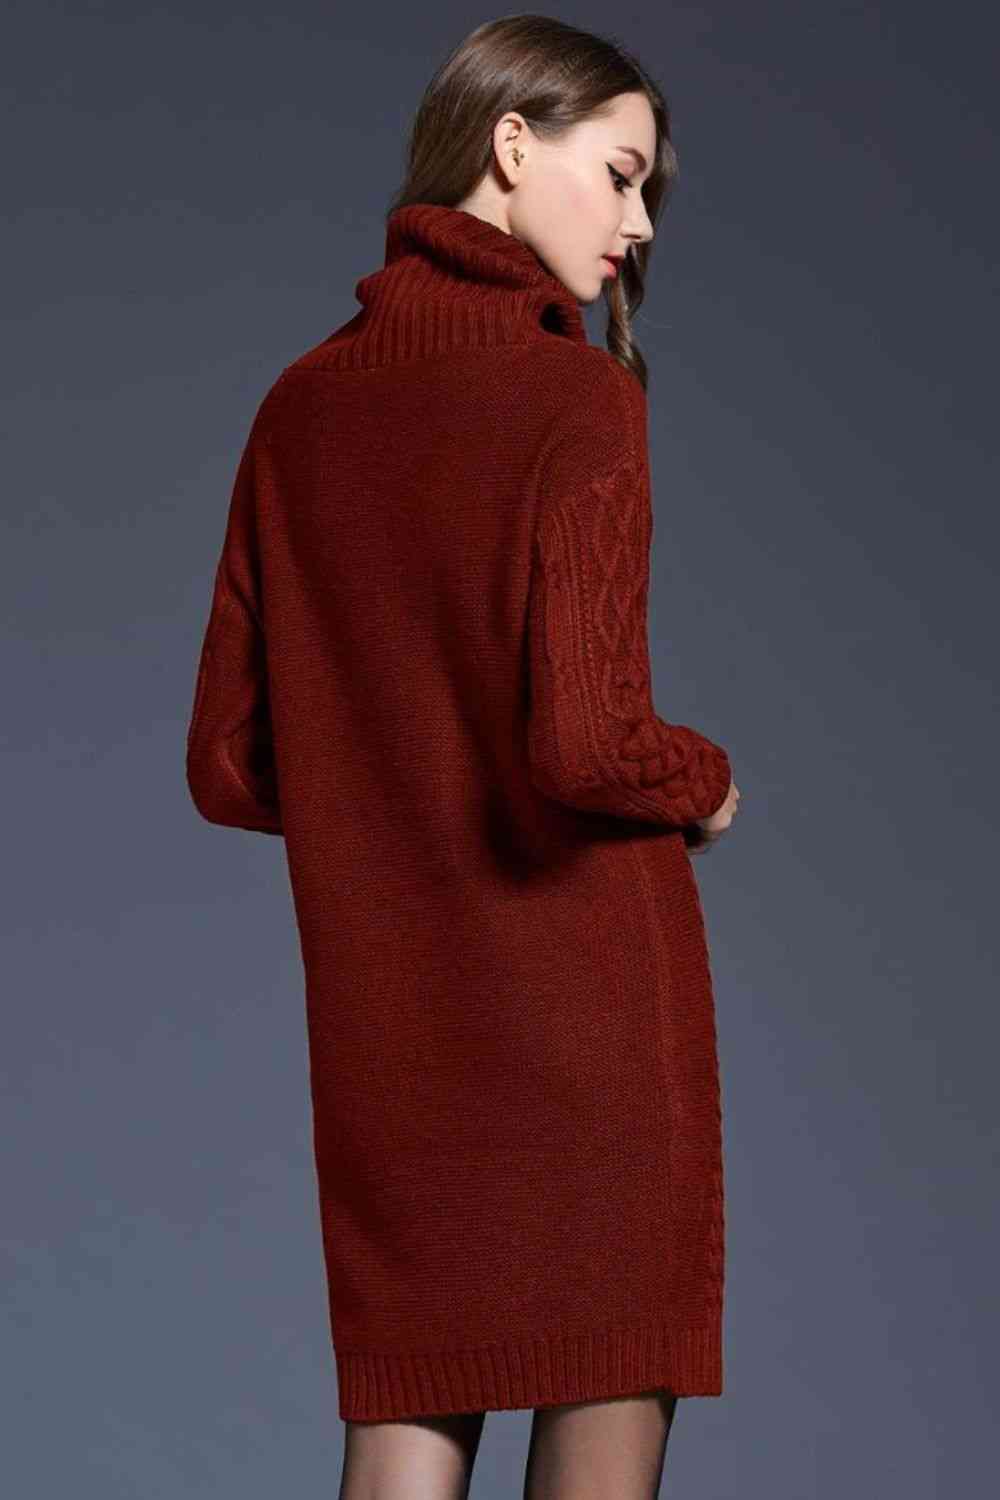 Woven Right Full Size Mixed Knit Cowl Neck Dropped Shoulder Sweater Dress - Guy Christopher 